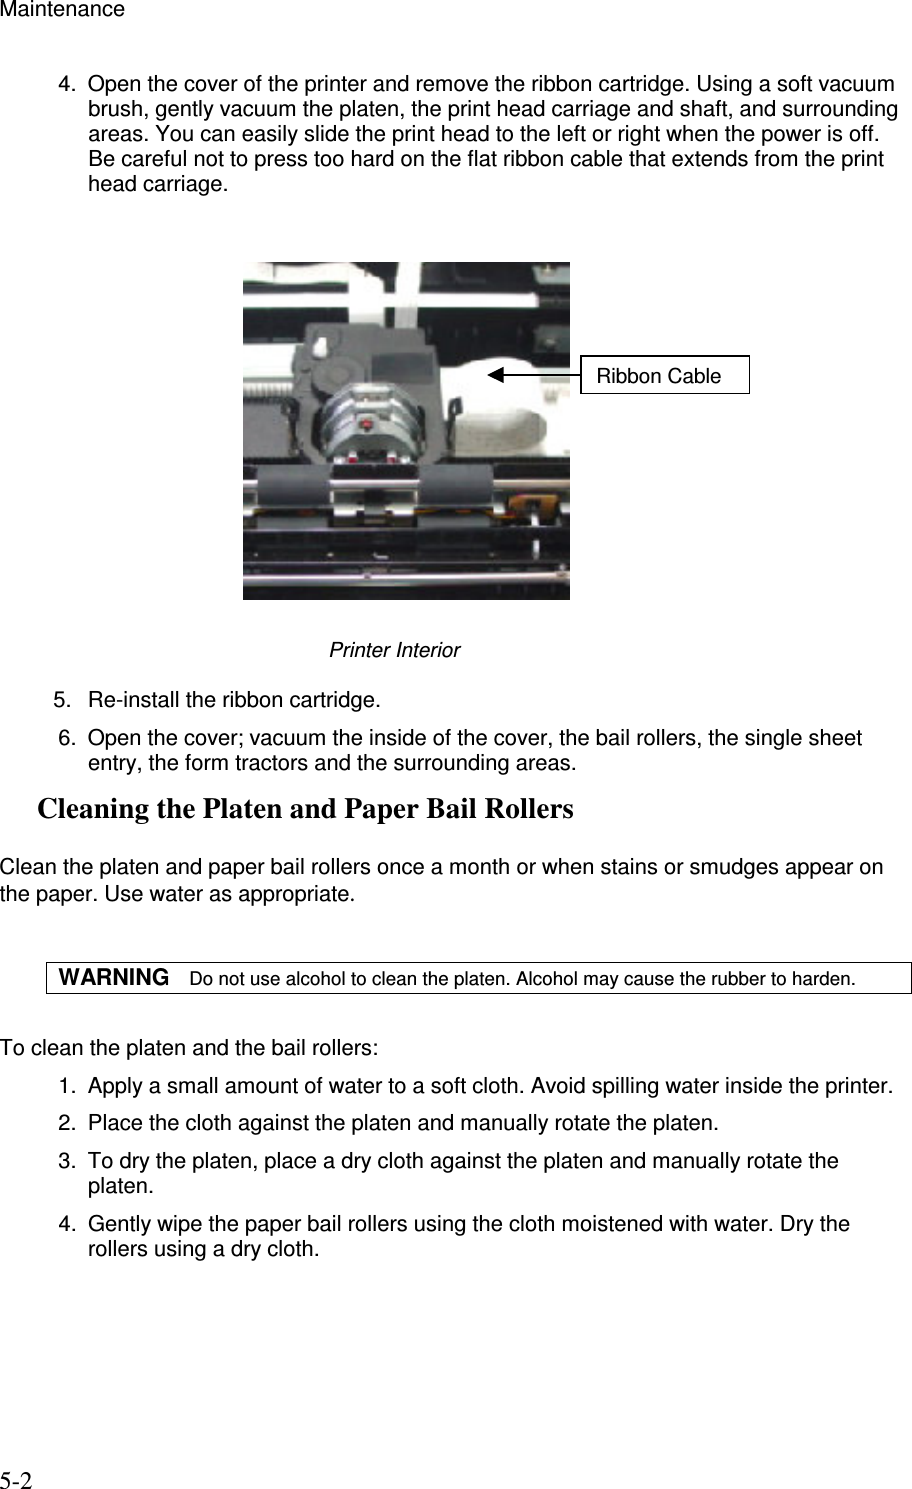 Maintenance 5-2 4.  Open the cover of the printer and remove the ribbon cartridge. Using a soft vacuum brush, gently vacuum the platen, the print head carriage and shaft, and surrounding areas. You can easily slide the print head to the left or right when the power is off. Be careful not to press too hard on the flat ribbon cable that extends from the print head carriage.               Printer Interior          5.  Re-install the ribbon cartridge.  6.  Open the cover; vacuum the inside of the cover, the bail rollers, the single sheet entry, the form tractors and the surrounding areas. Cleaning the Platen and Paper Bail Rollers  Clean the platen and paper bail rollers once a month or when stains or smudges appear on the paper. Use water as appropriate.  WARNING   Do not use alcohol to clean the platen. Alcohol may cause the rubber to harden.  To clean the platen and the bail rollers: 1.  Apply a small amount of water to a soft cloth. Avoid spilling water inside the printer. 2.  Place the cloth against the platen and manually rotate the platen. 3.  To dry the platen, place a dry cloth against the platen and manually rotate the platen. 4.  Gently wipe the paper bail rollers using the cloth moistened with water. Dry the rollers using a dry cloth.    Ribbon Cable 